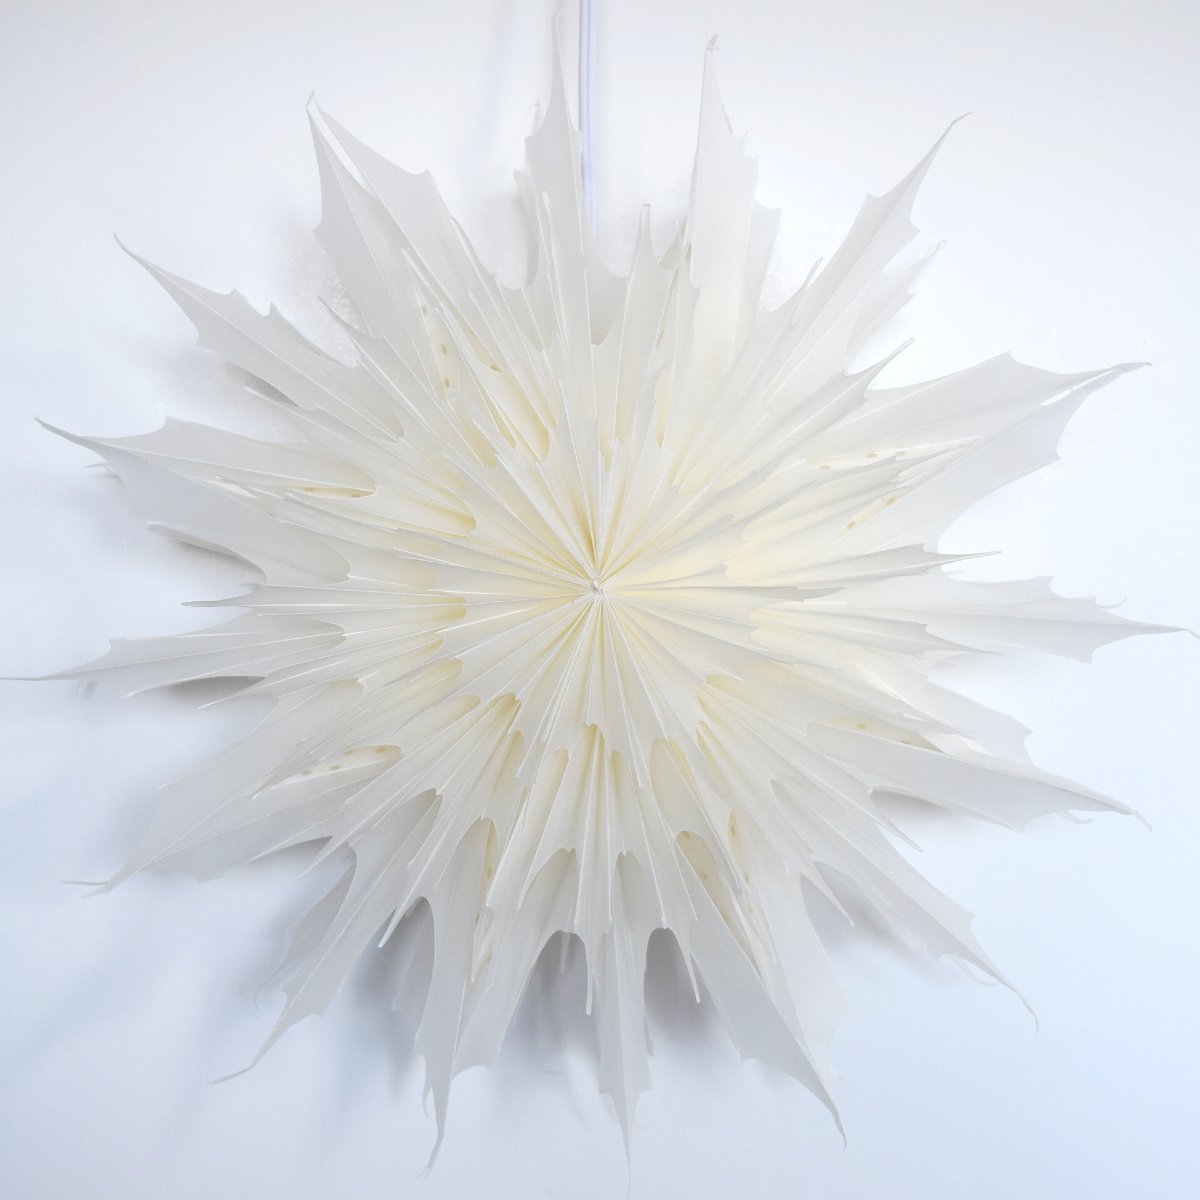 24&quot; White Sleet Snowflake Star Lantern Pizzelle Design - Great With or Without Lights - Ideal for Holiday and Snowflake Decorations, Weddings, Parties, and Home Decor